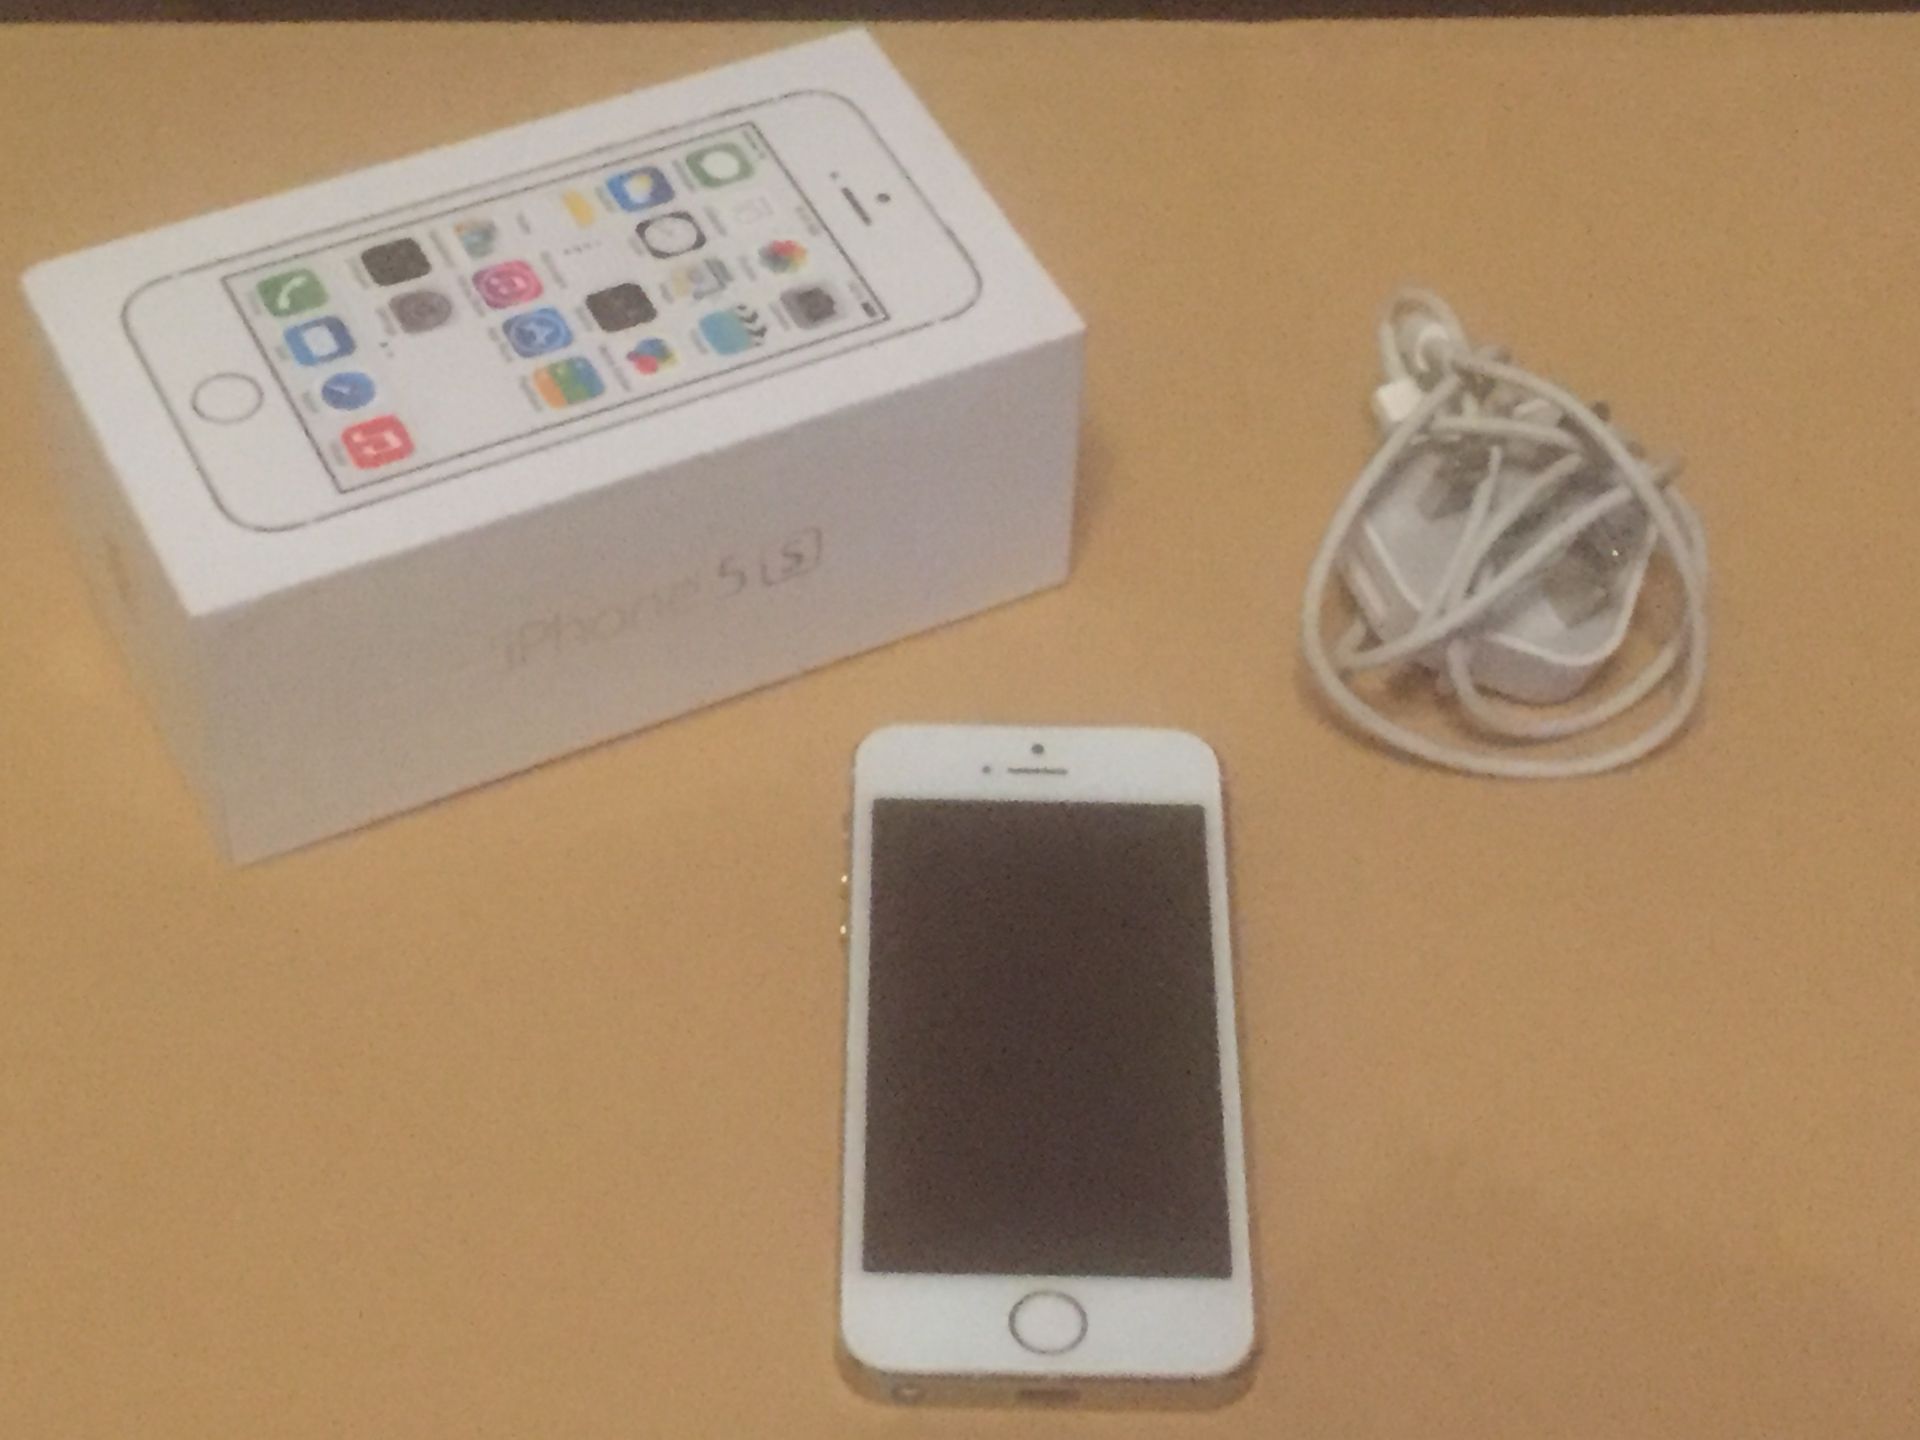 APPLE IPHONE 5S GOLD - 16GB - ON TMOBILE/EE NETWORK - USED - BOXED - No reserve